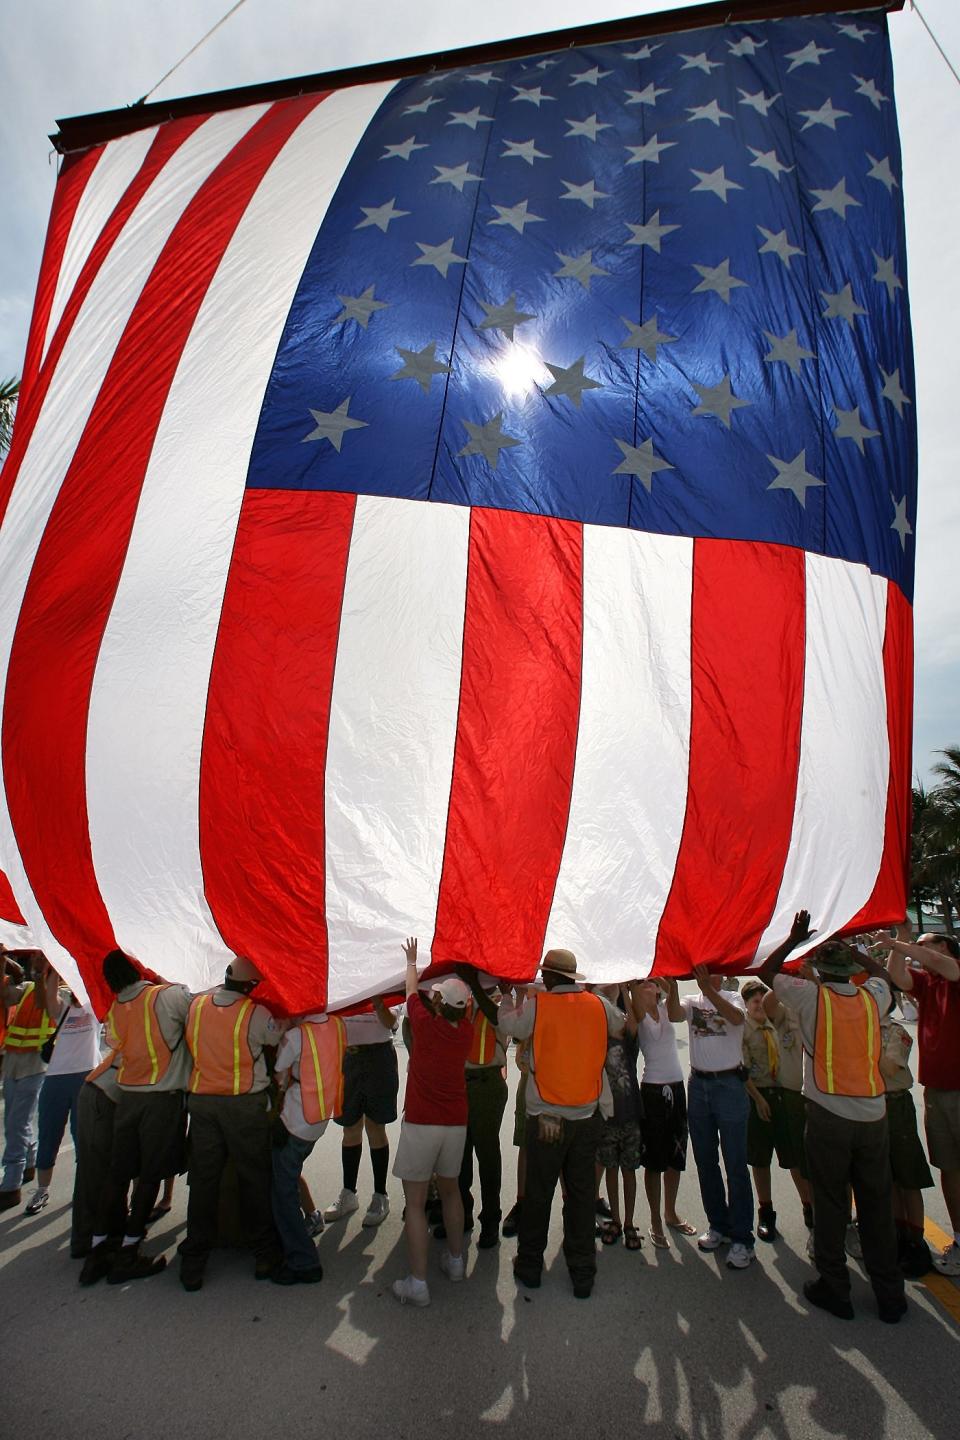 The Delray Beach 4th of July Celebration on East Atlantic Avenue begins with the raising of a 60-foot flag and singing of the National Anthem.